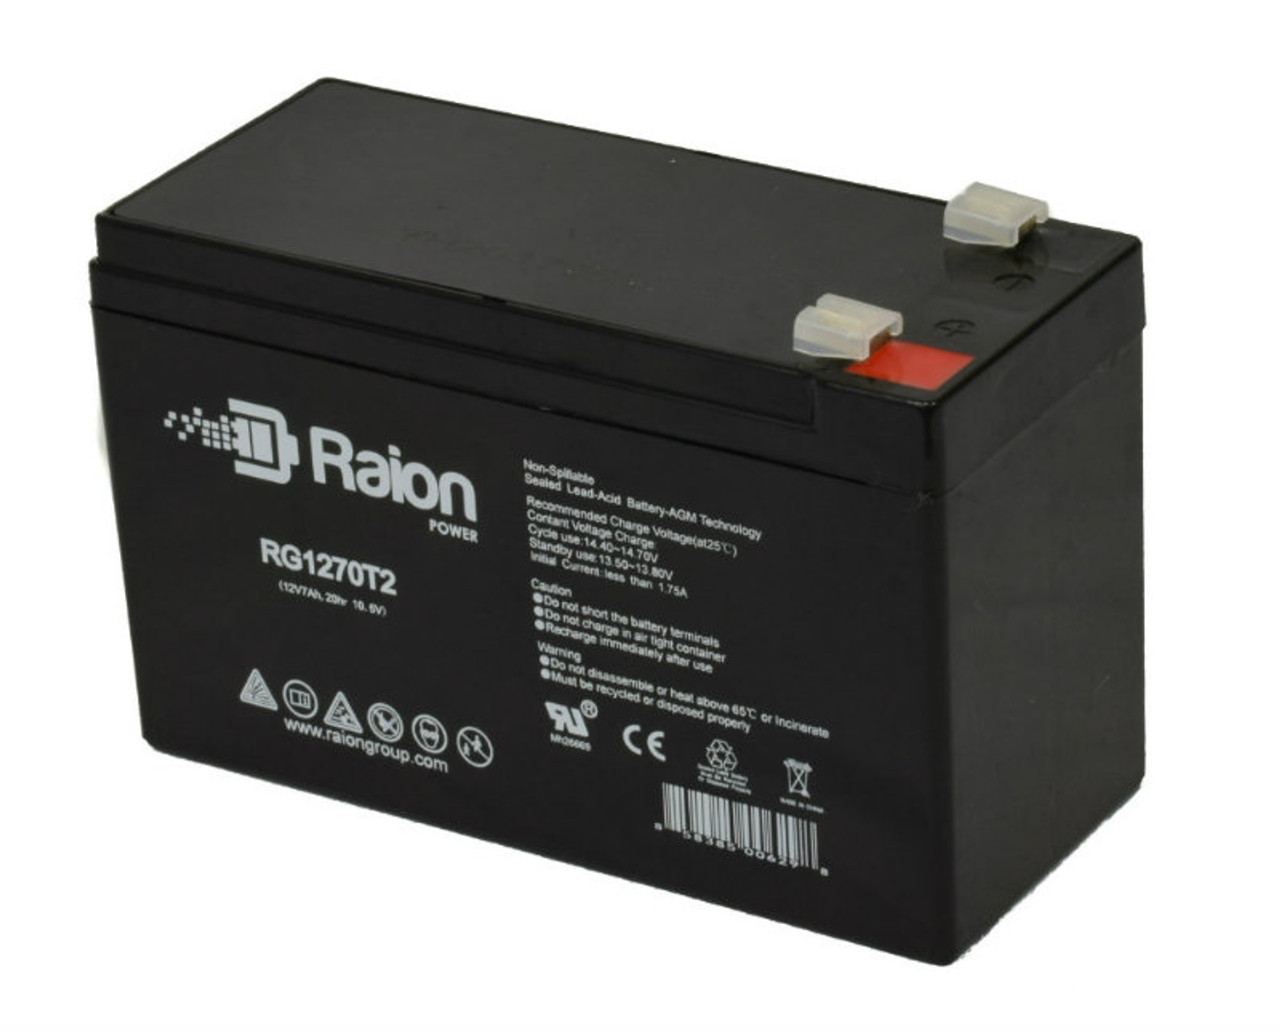 Raion Power RG1270T2 12V 7Ah Rechargeable Battery for CooPower CPD12-7